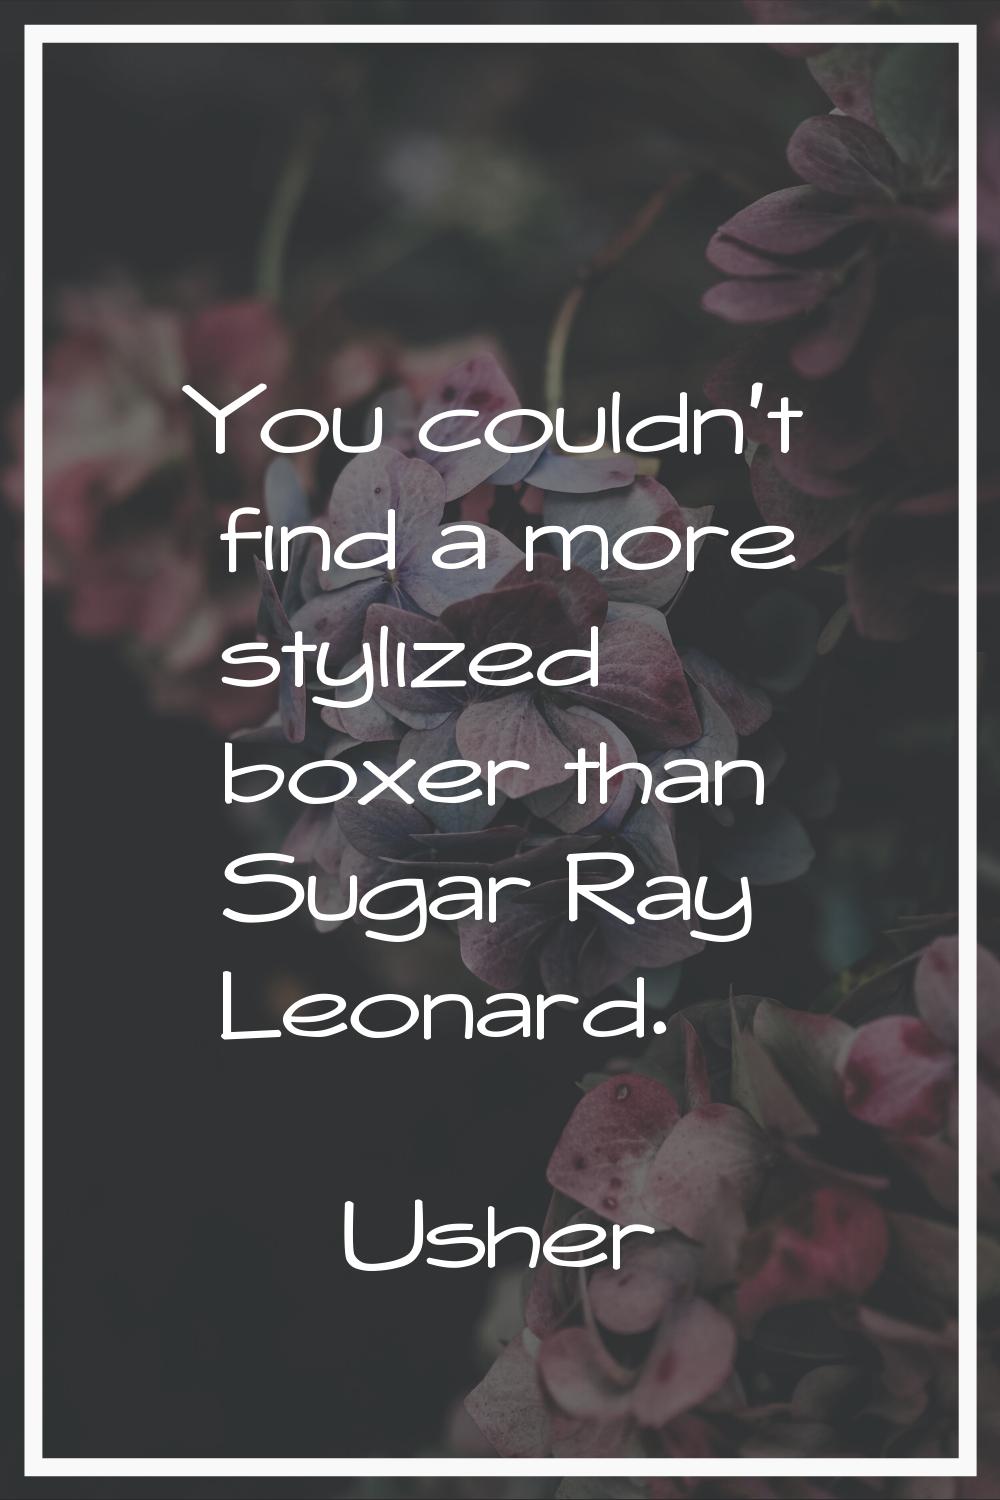 You couldn't find a more stylized boxer than Sugar Ray Leonard.